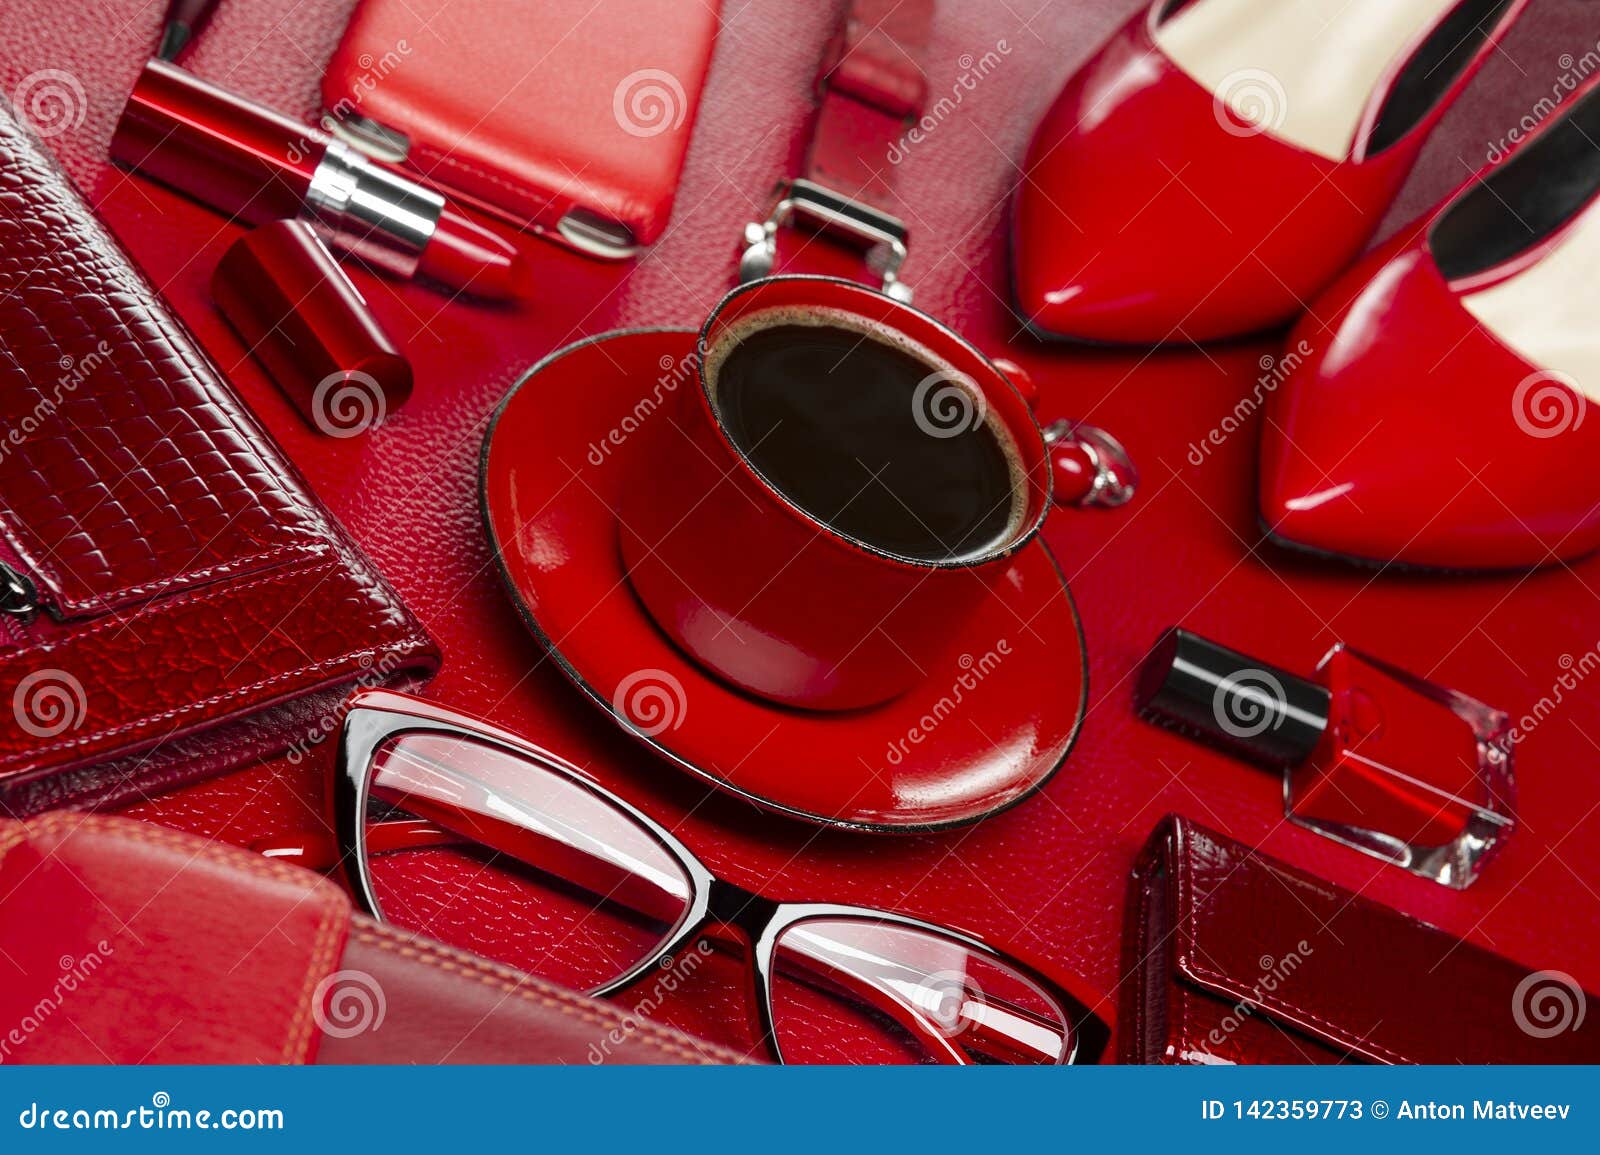 https://thumbs.dreamstime.com/z/woman-red-accessories-coffee-cosmetic-jewelry-gadget-other-luxury-objects-leather-background-fashion-industry-modern-142359773.jpg